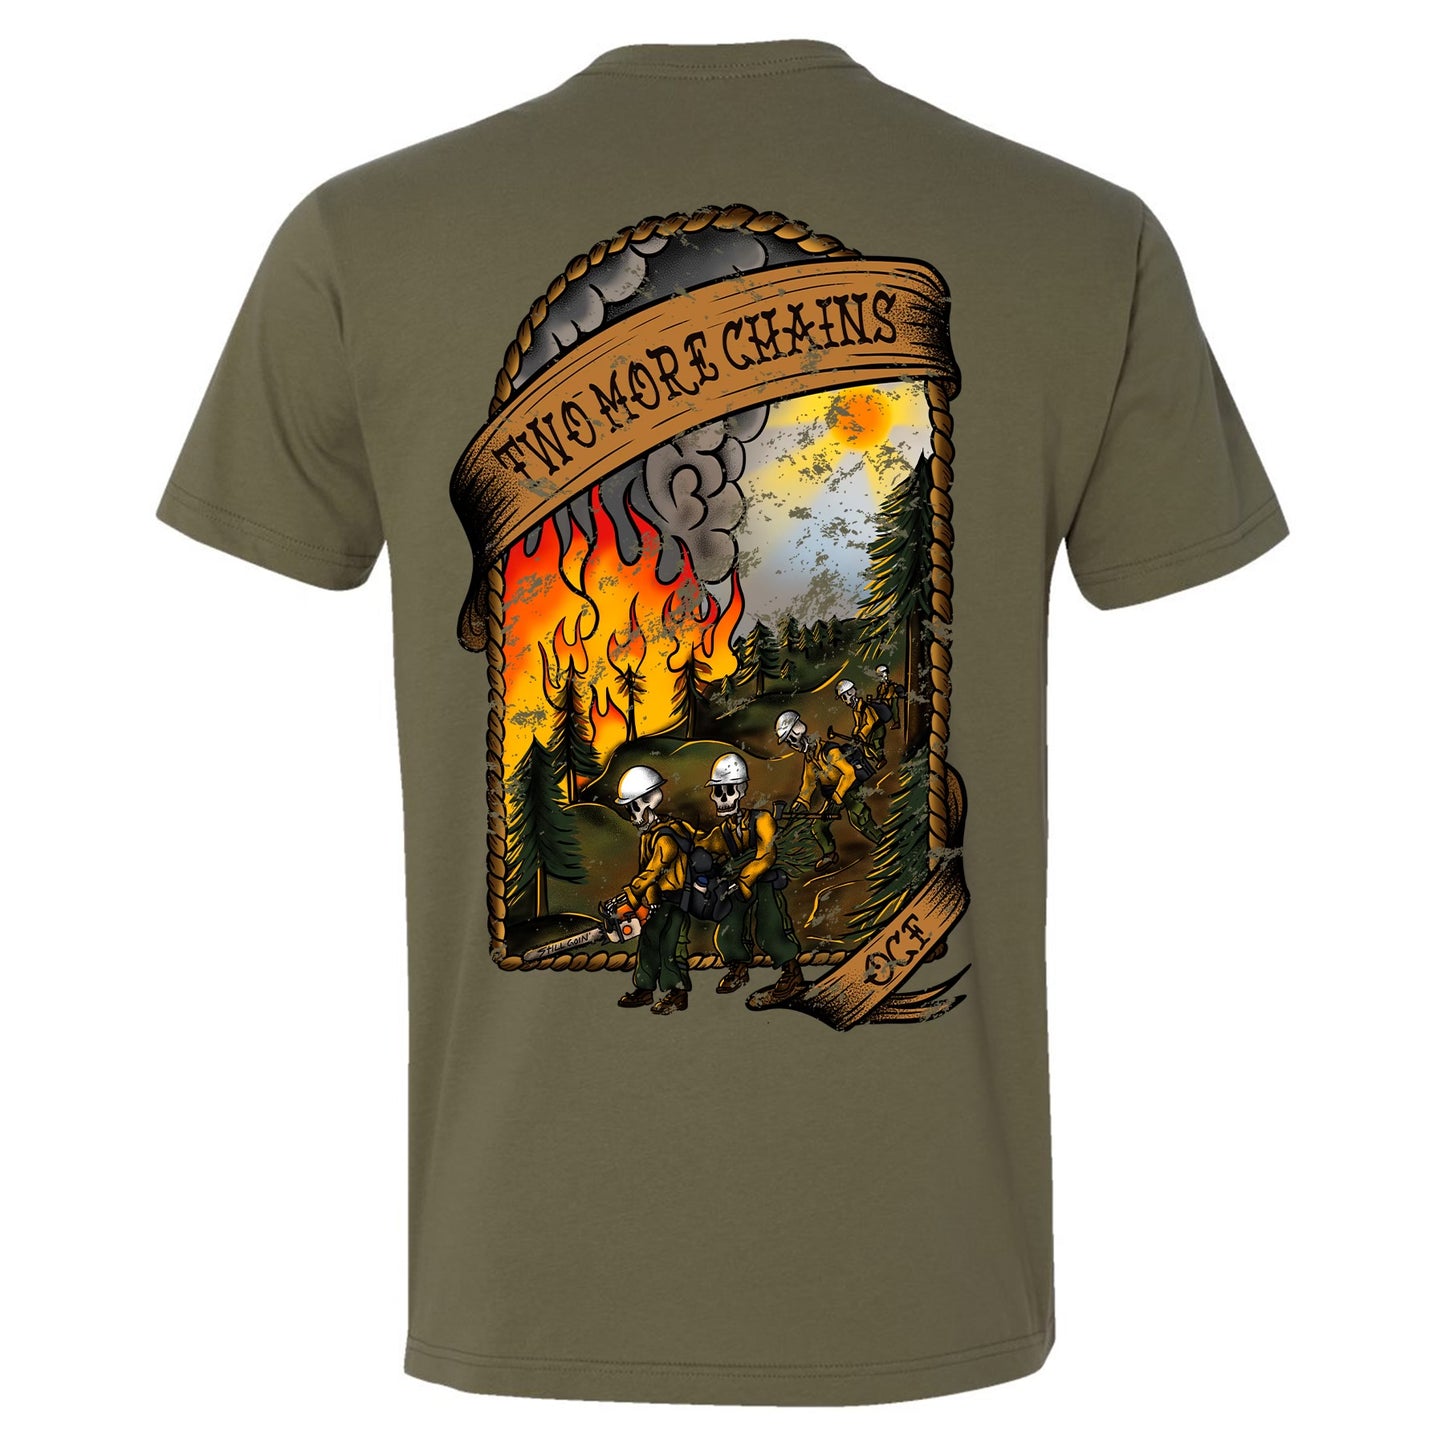 Two More Chains Wildland T-Shirt